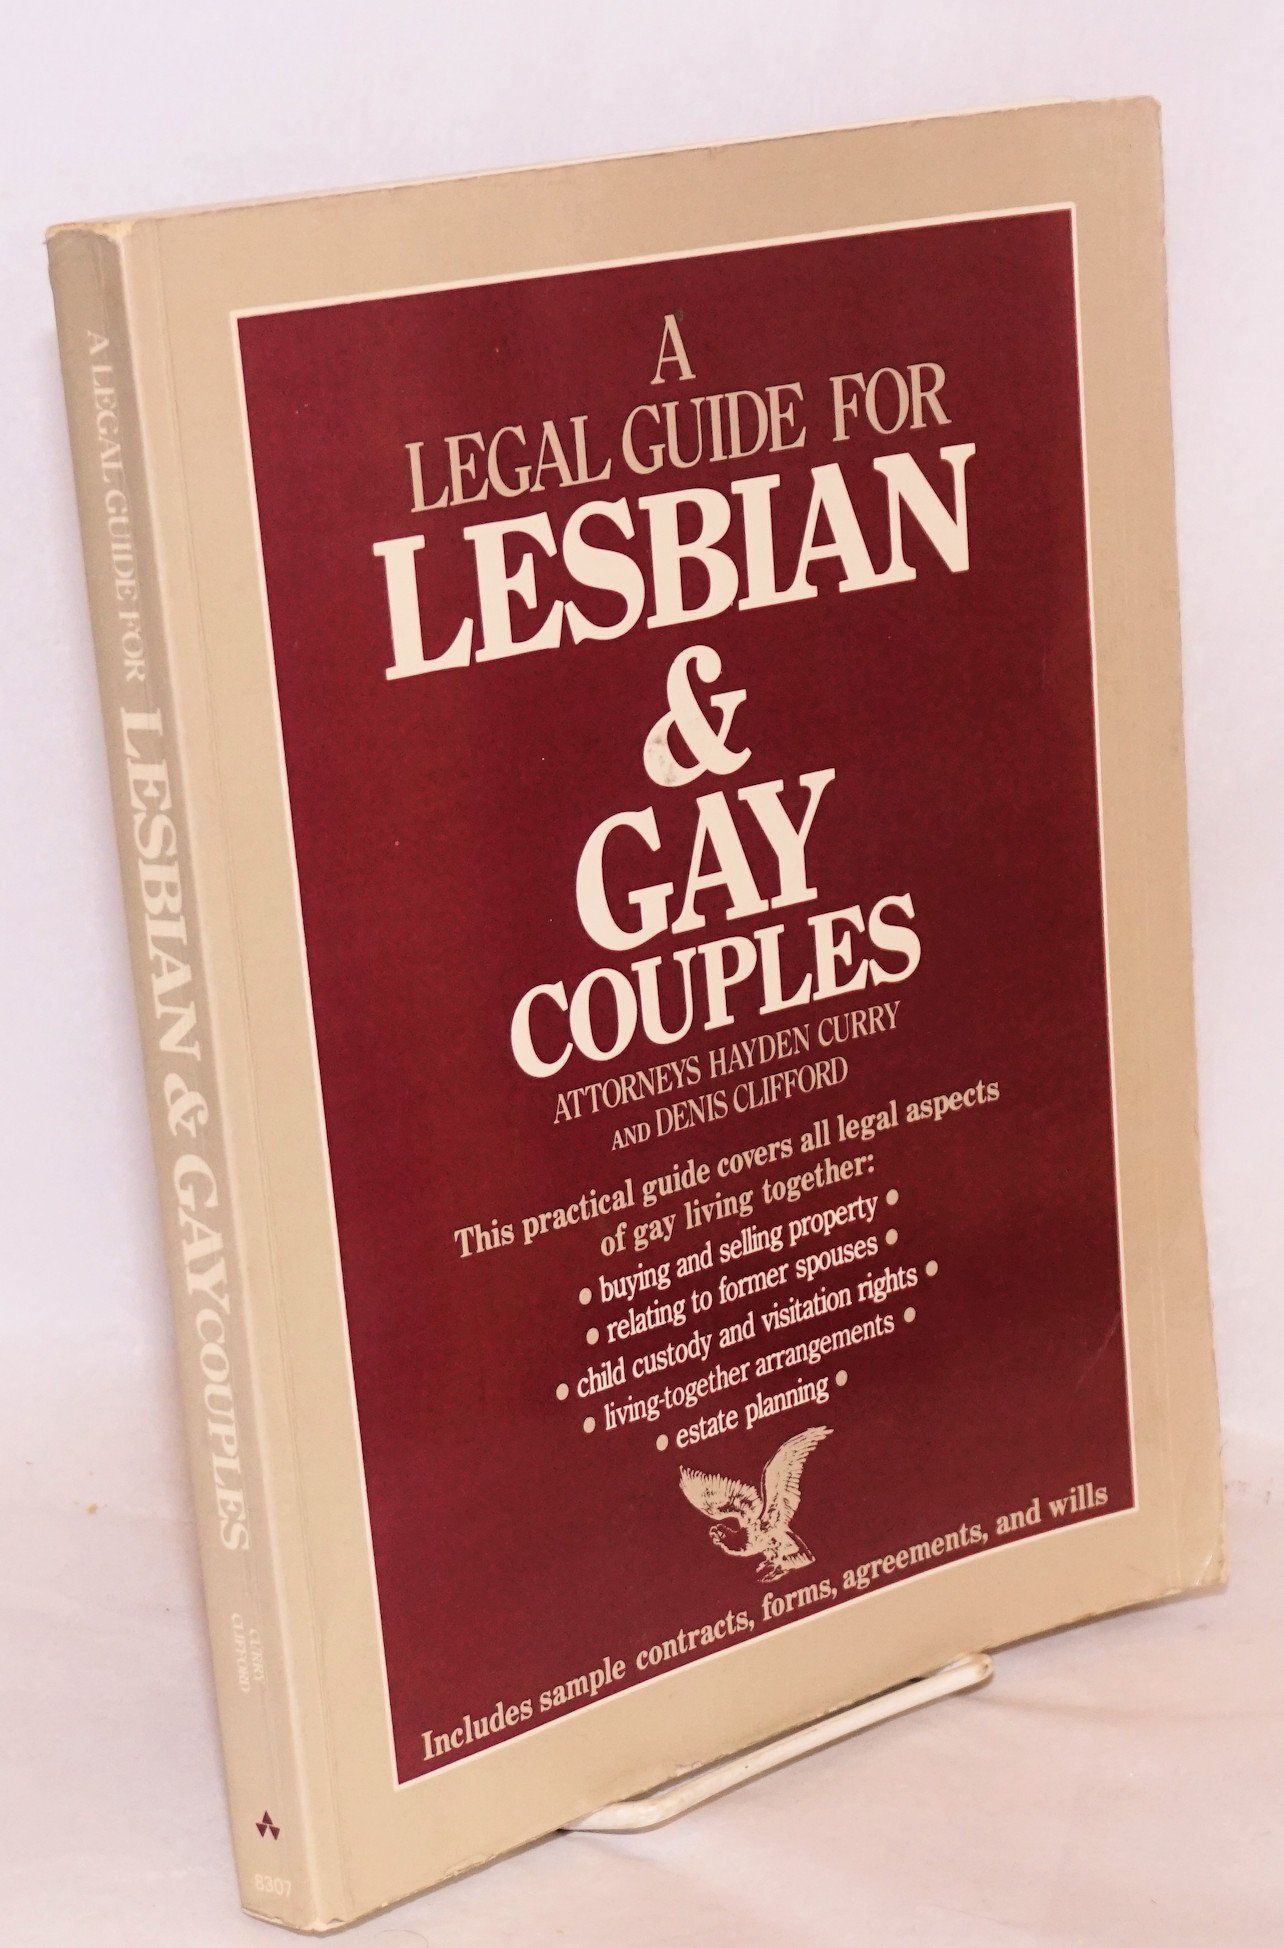 Couple couple gay gay guide guide legal legal lesbian lesbian